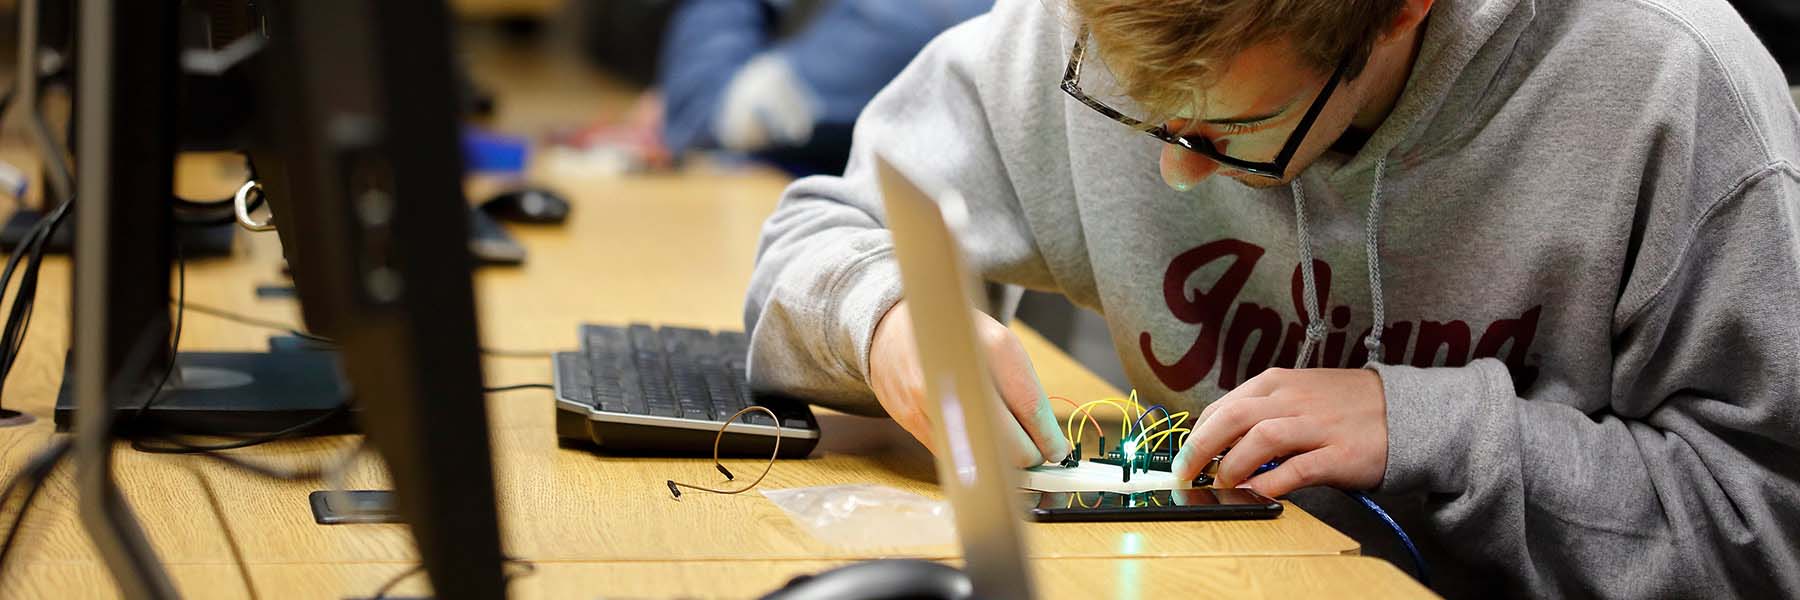 A student works on computer hardware, with circuits and wires, in a computer lab.